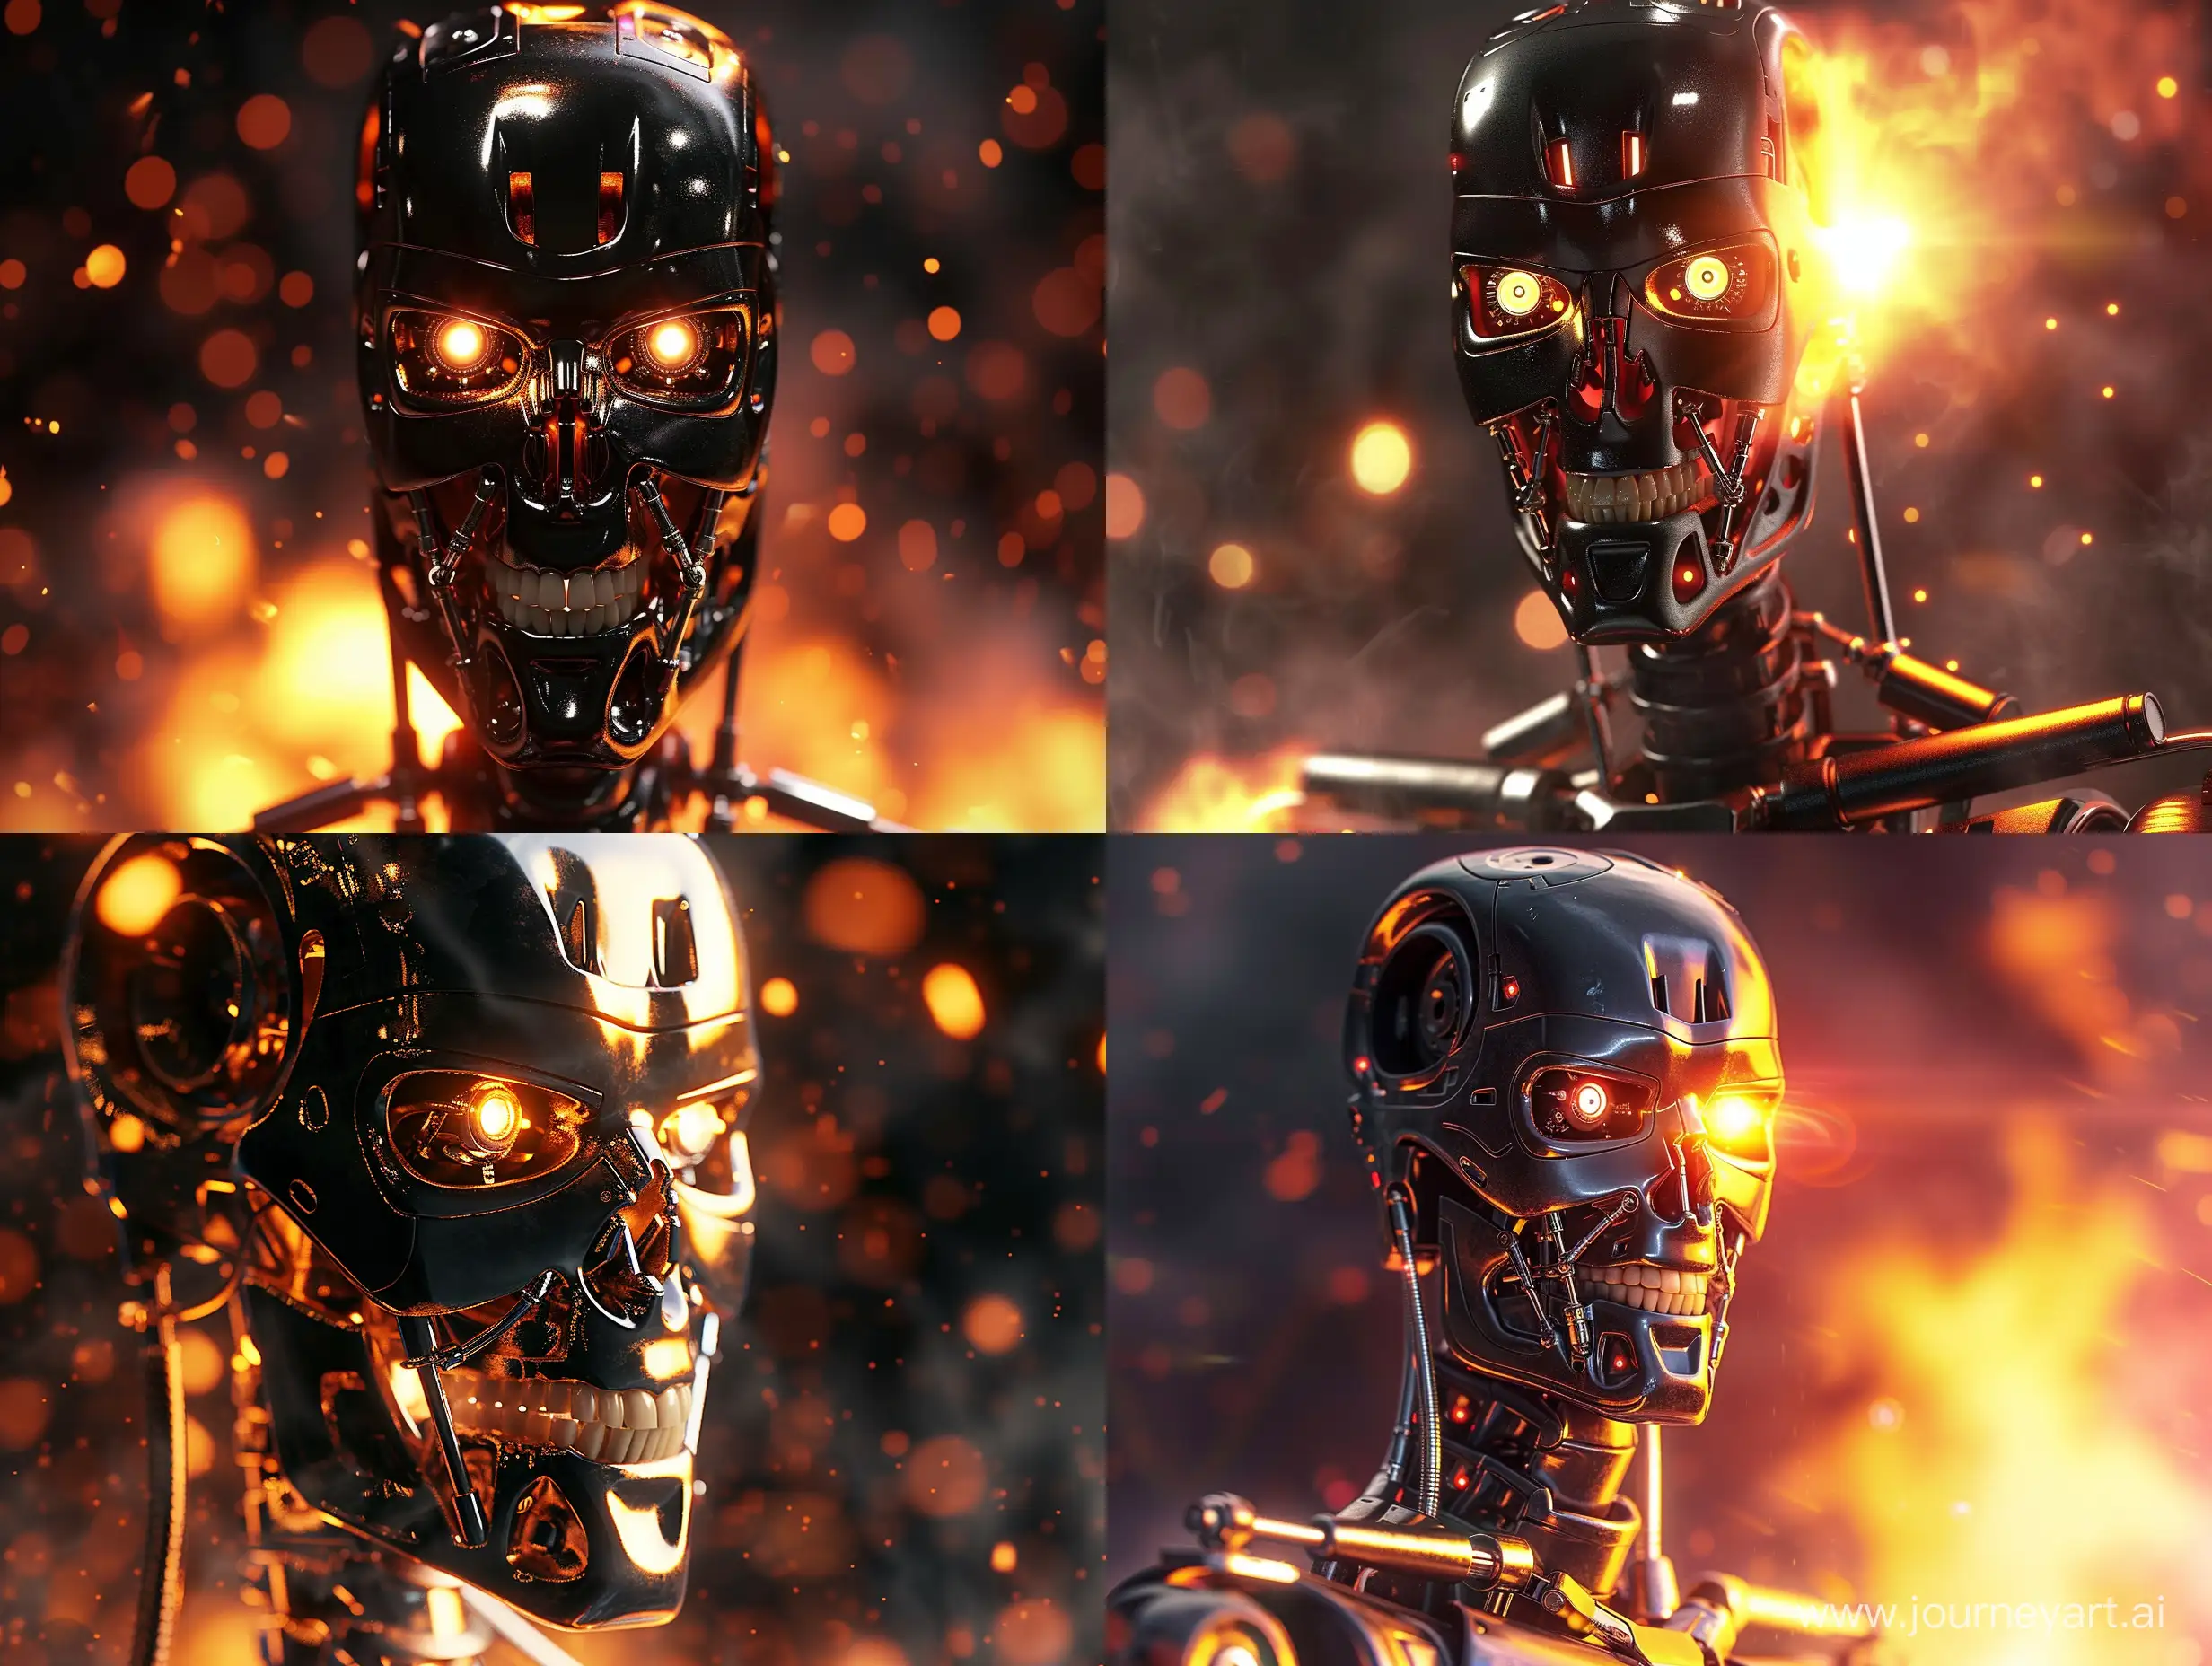 Terminator-Robot-in-Intense-Fire-Photorealistic-CloseUp-with-Dynamic-Reflections-and-Smoke